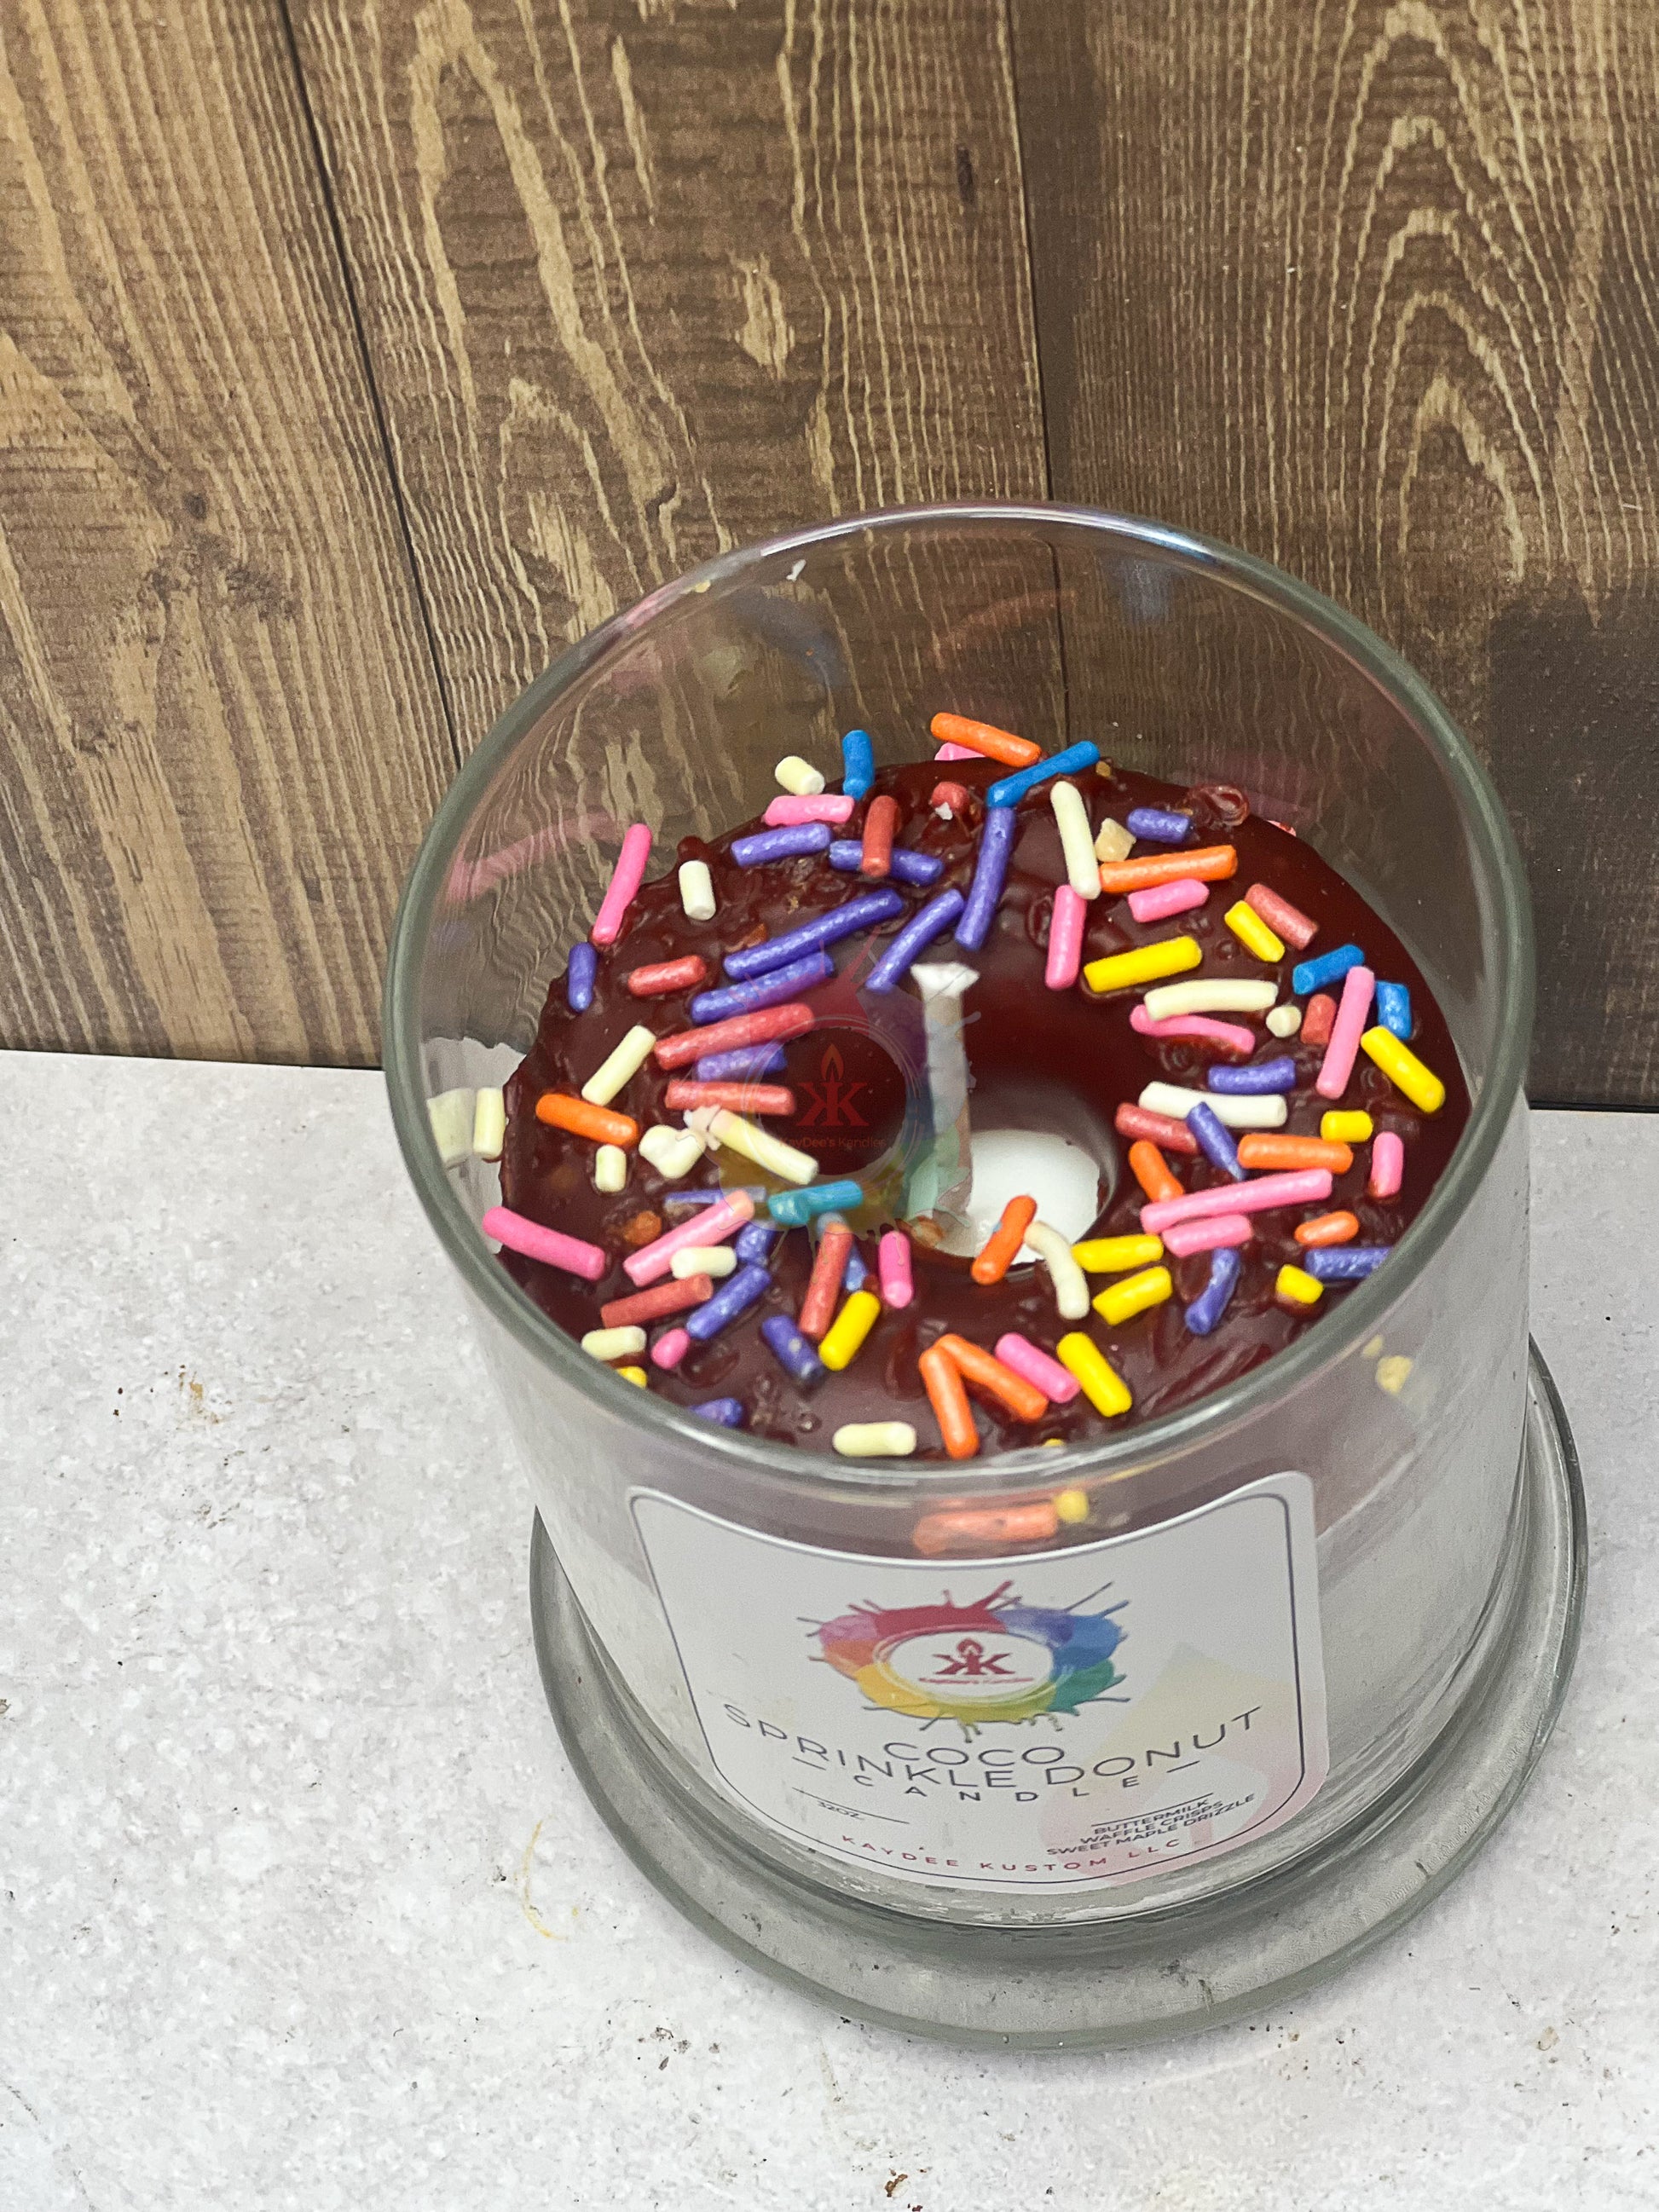 Jar candle donut. Chocolate frosted wax donut with sprinkles in the middle.